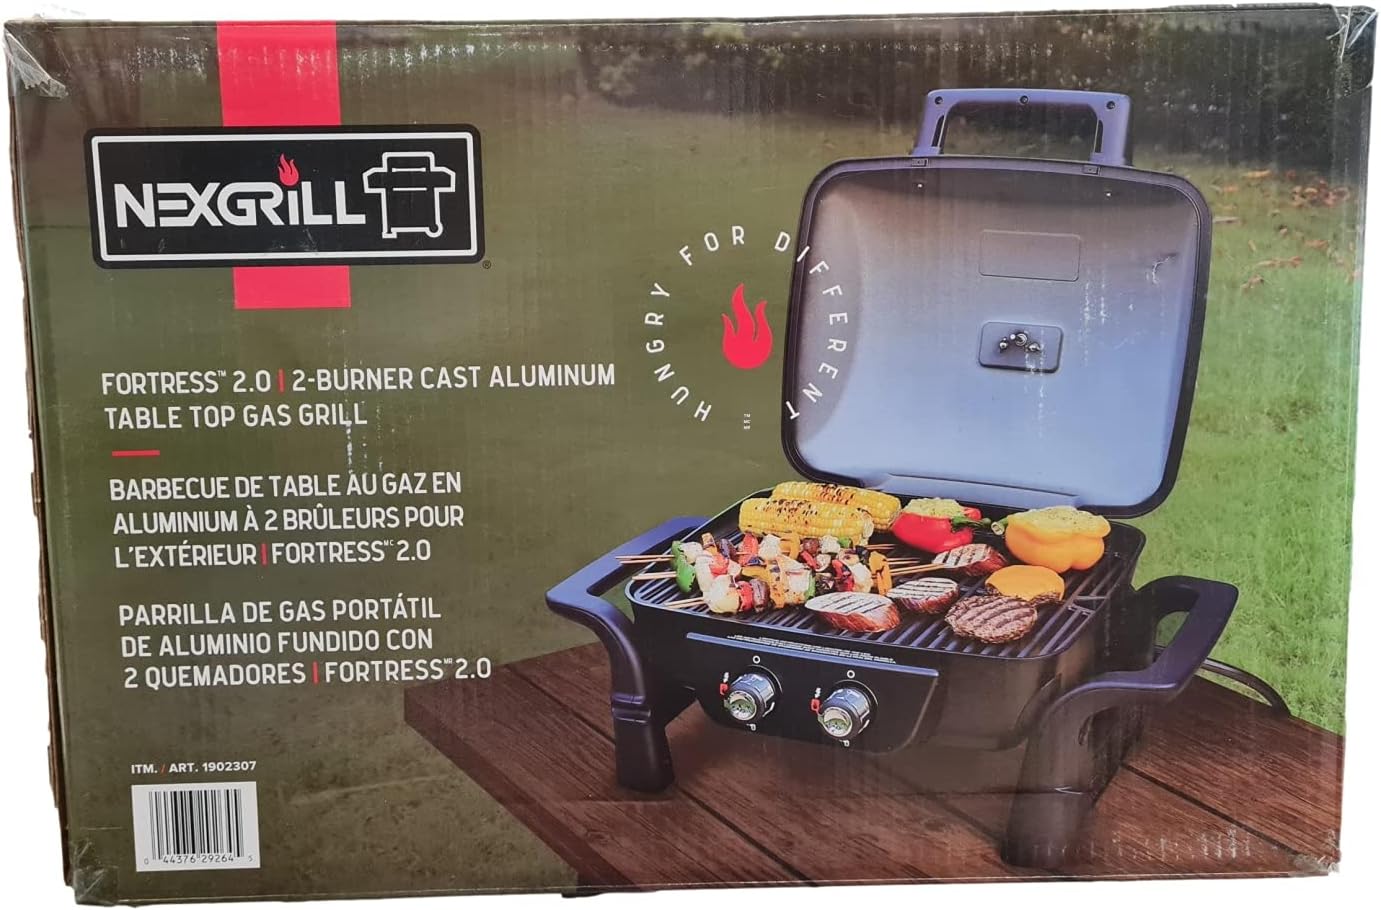 Grilling Enthusiasts: Master the Coleman RoadTrip Xcursion Grill with these 10 Essential Tips